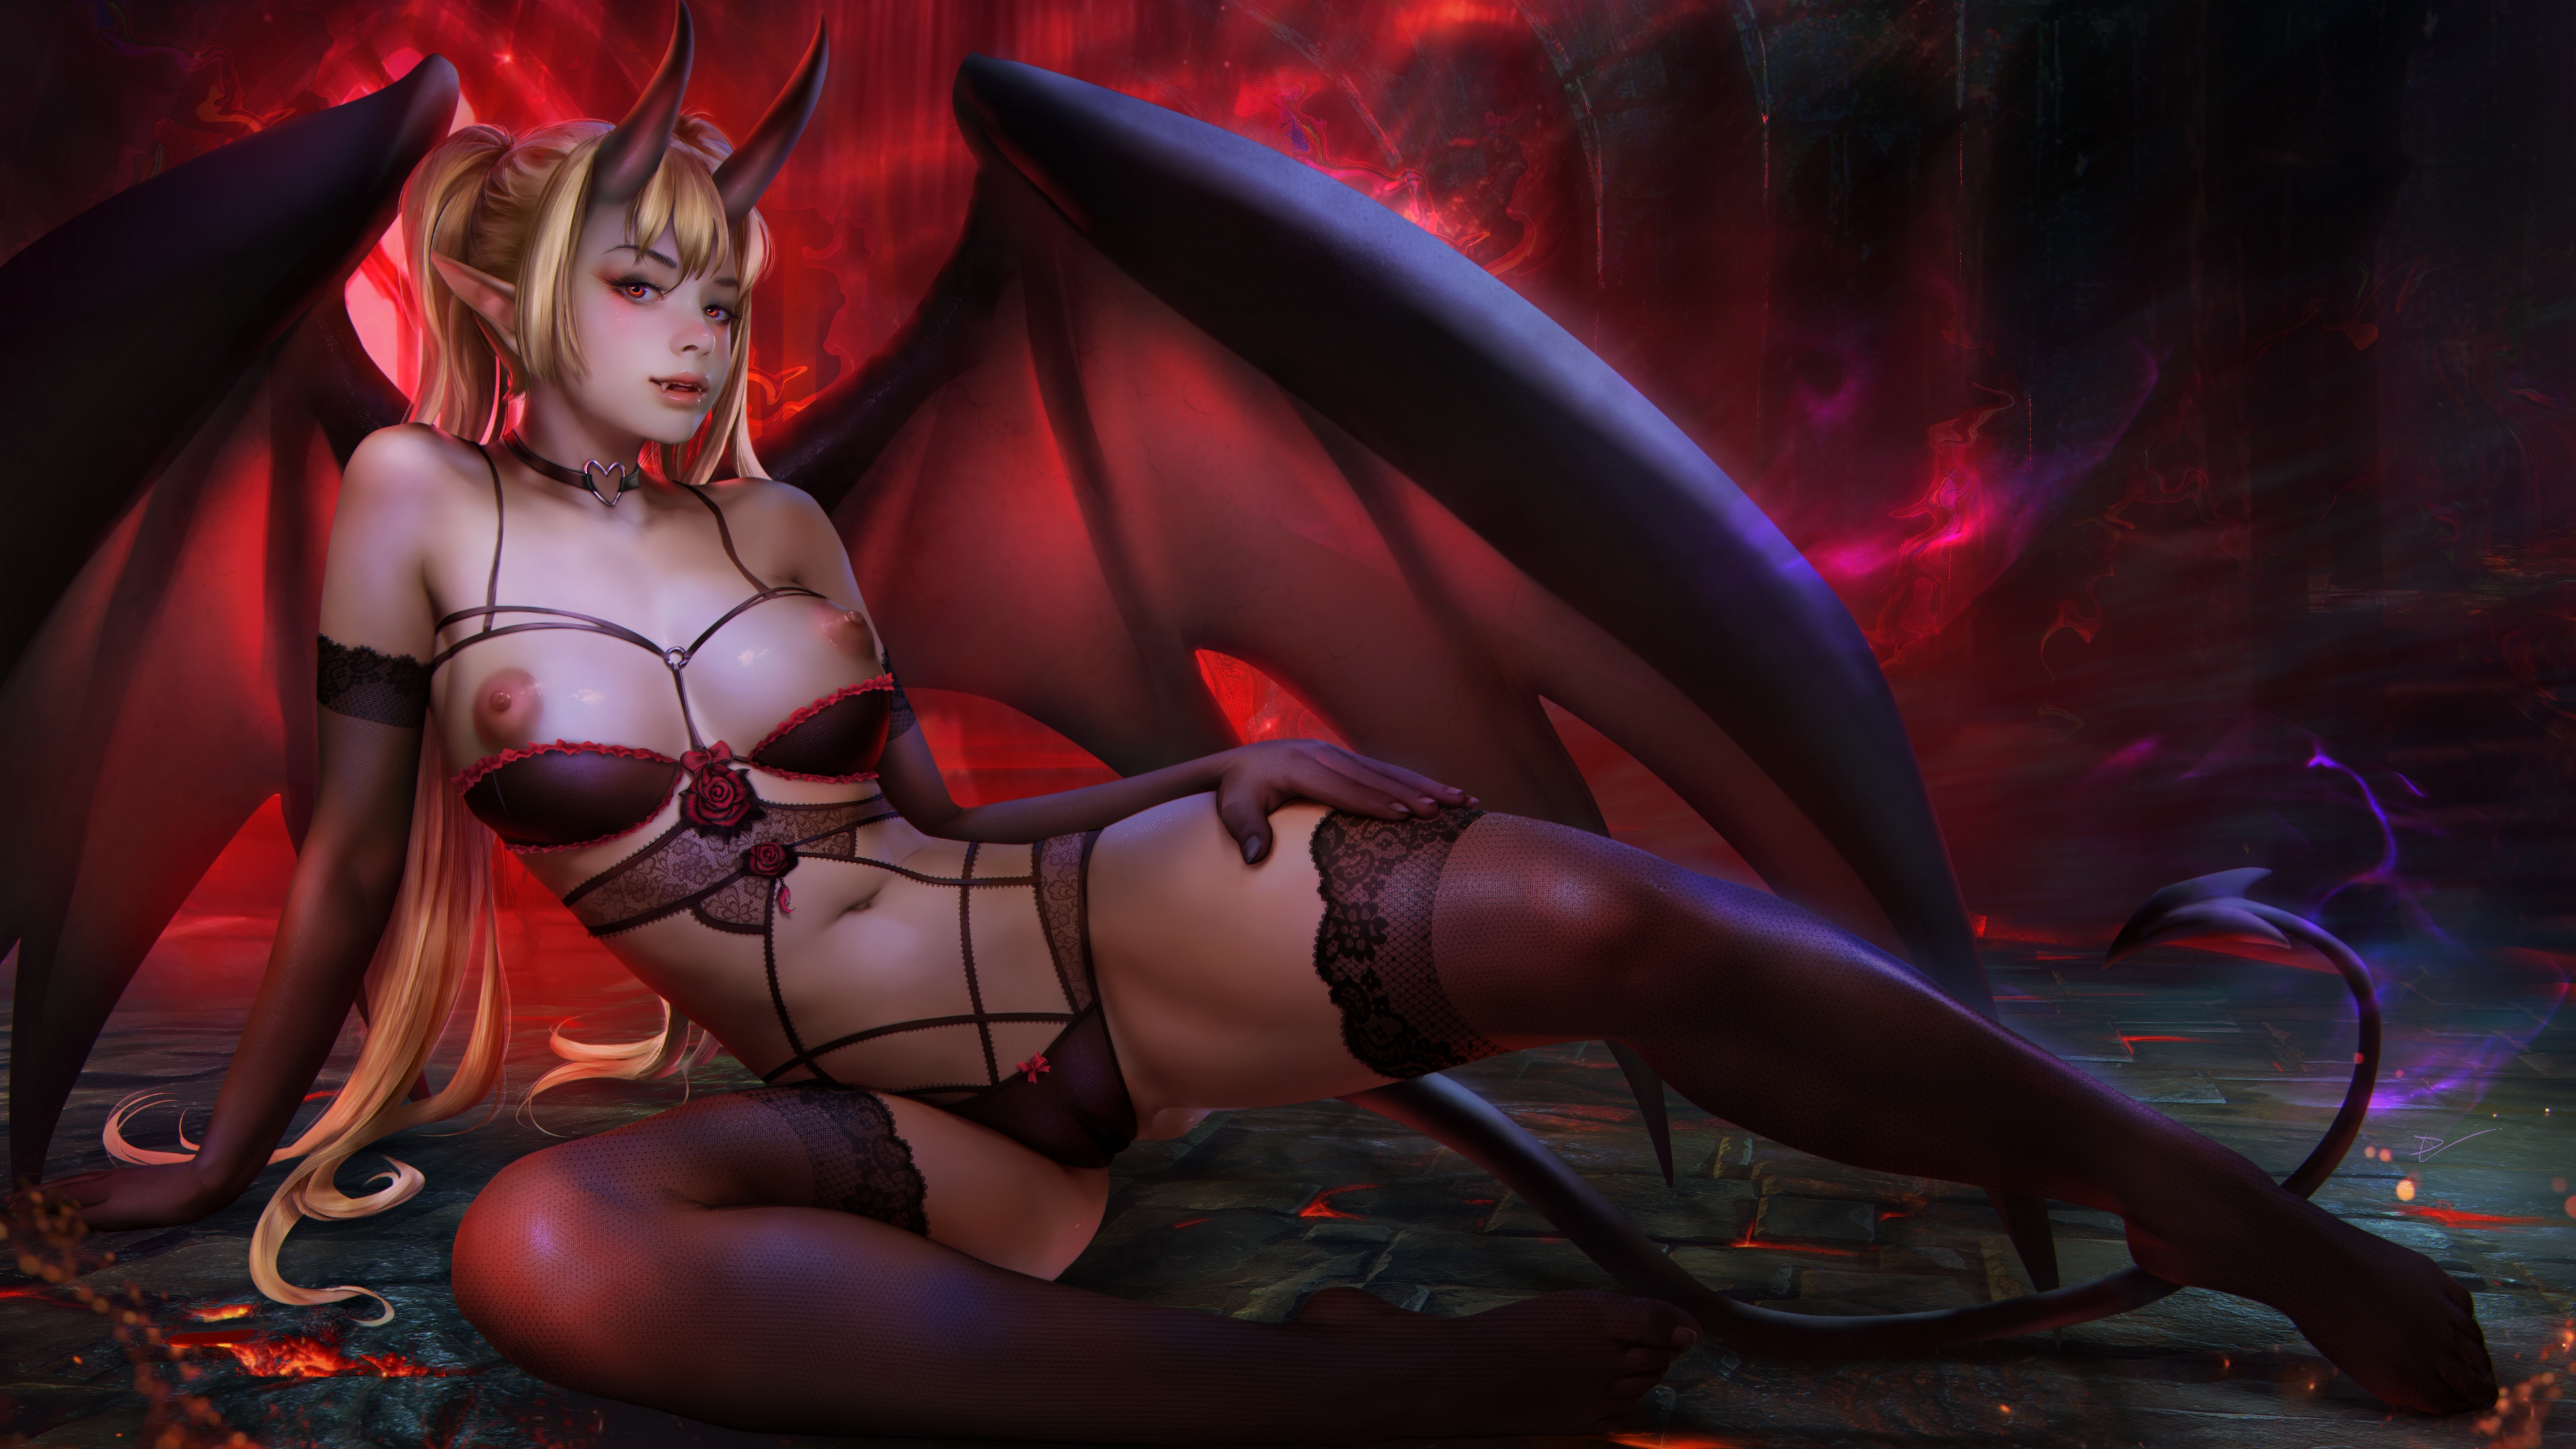 Free photo Lingerie show in hell